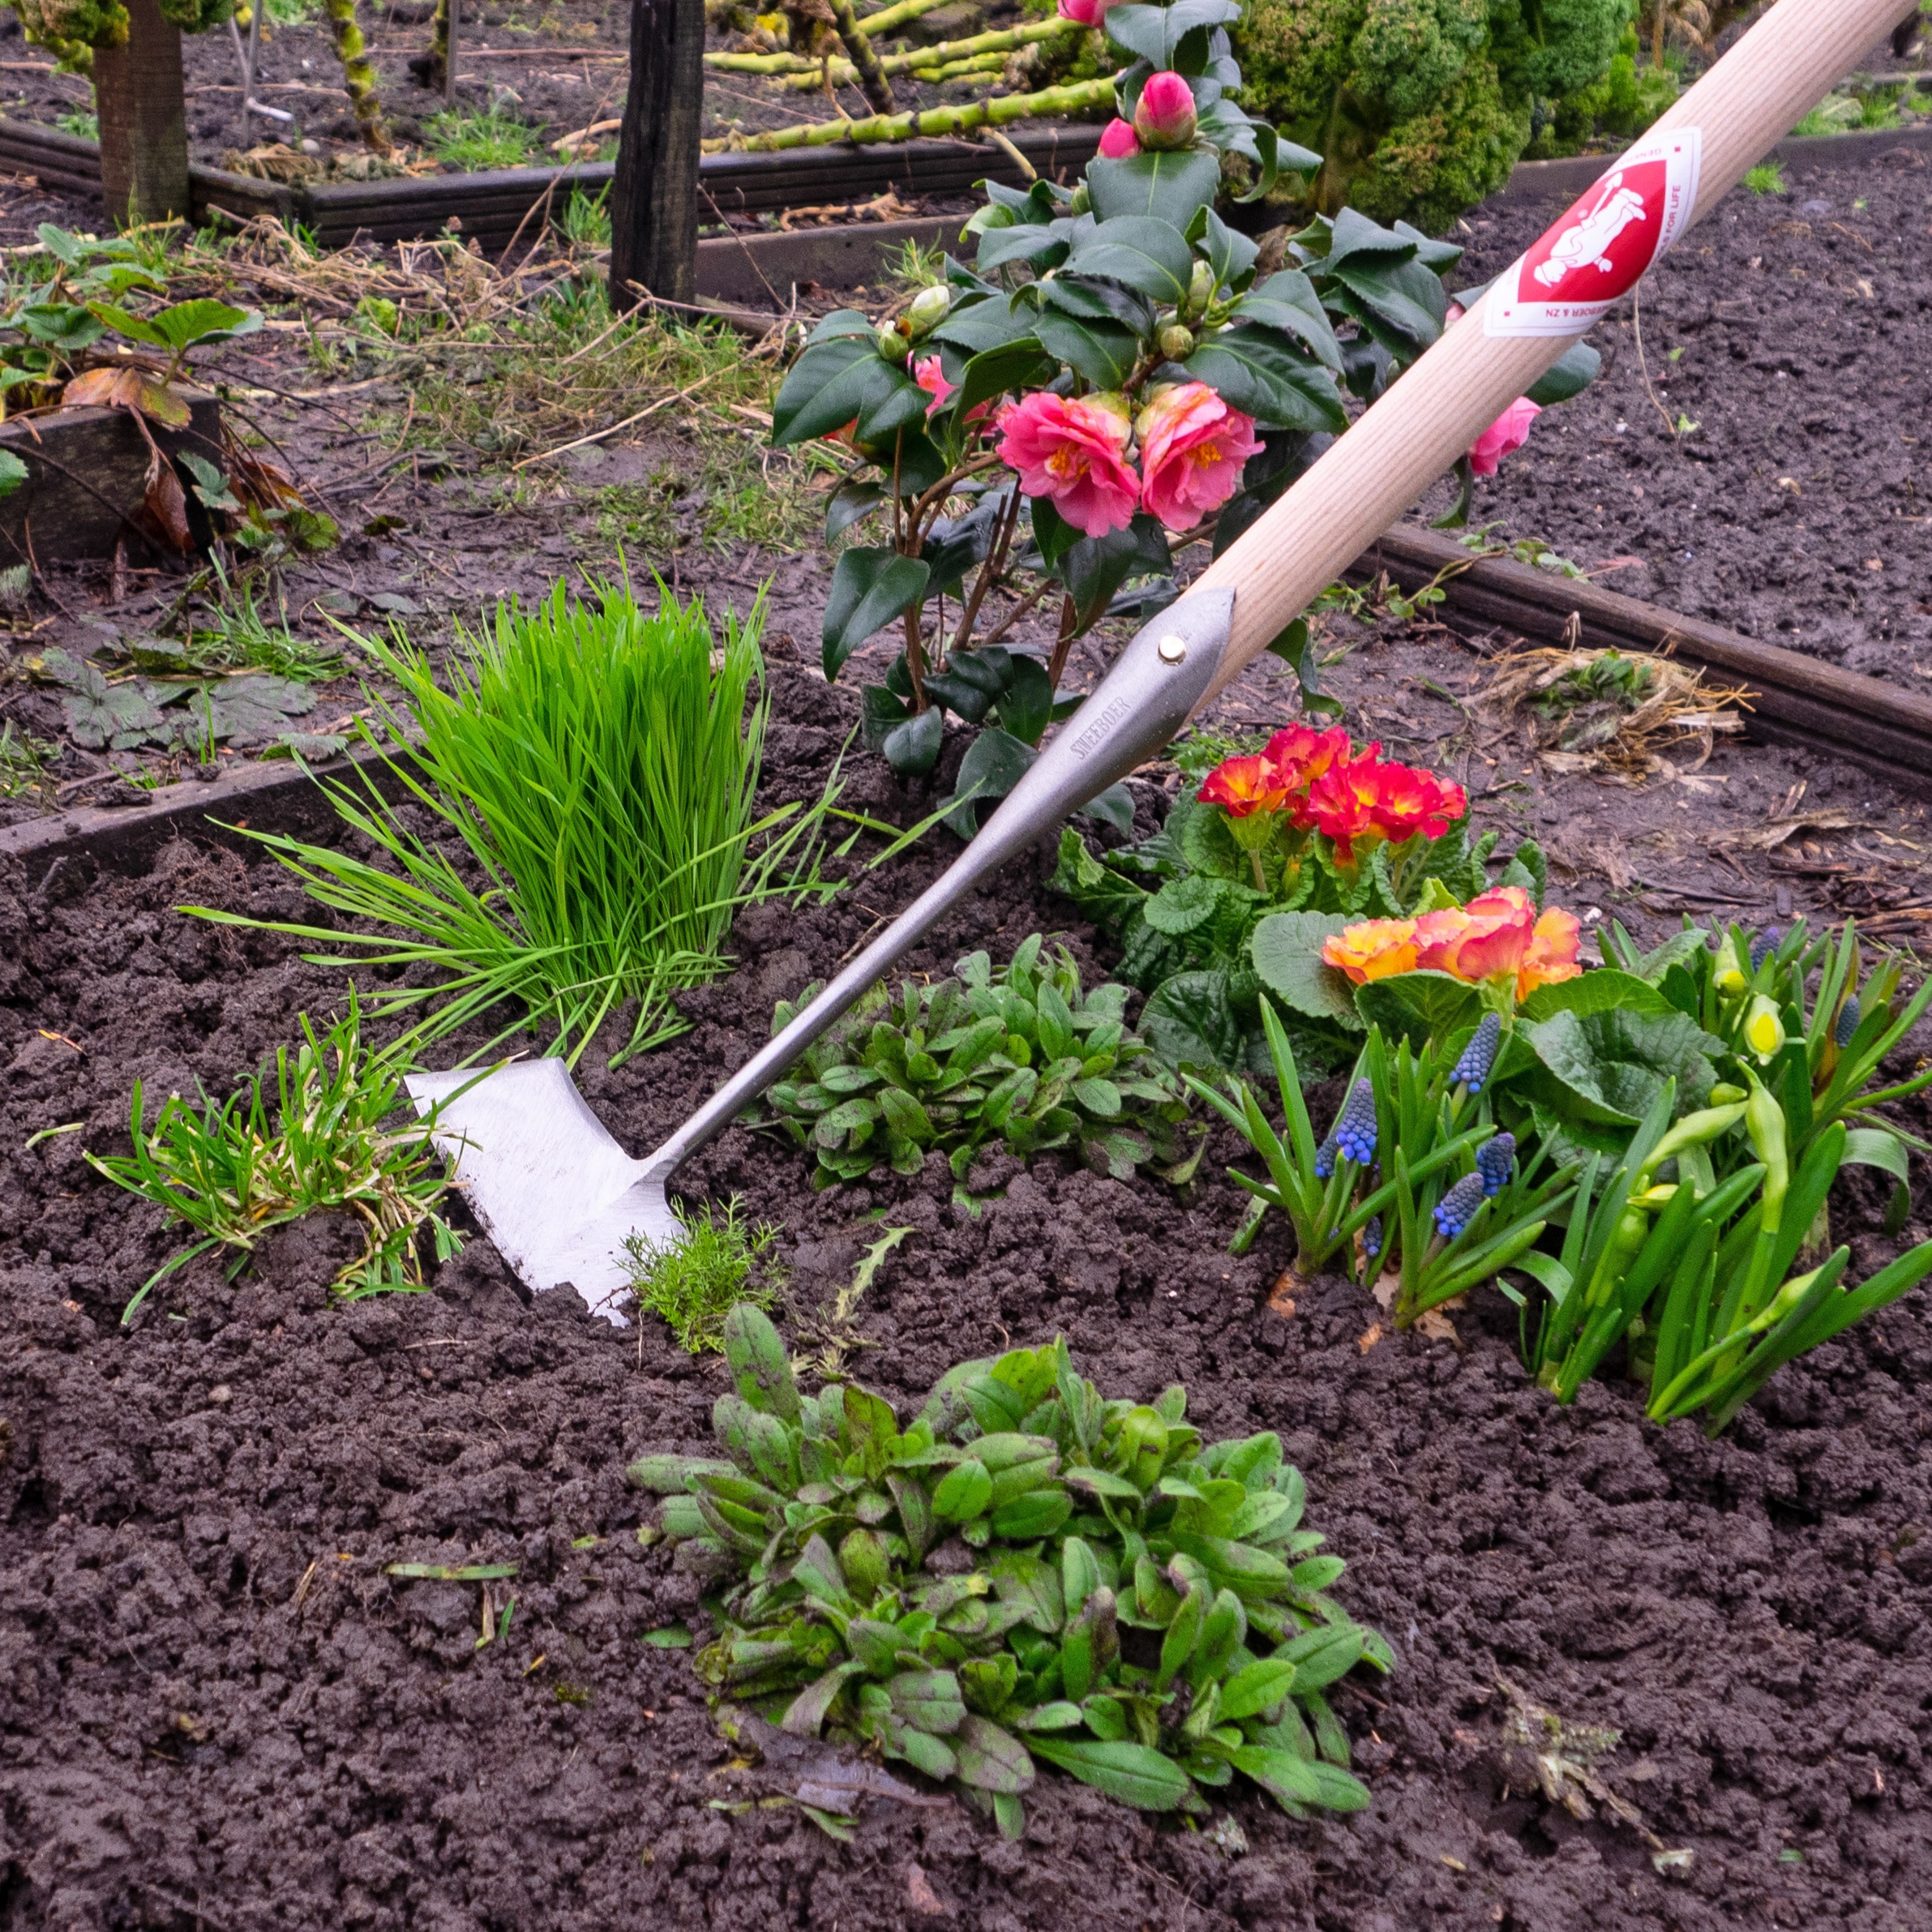 The Importance of Long Handles in Garden Tools: Ergonomics and Efficiency